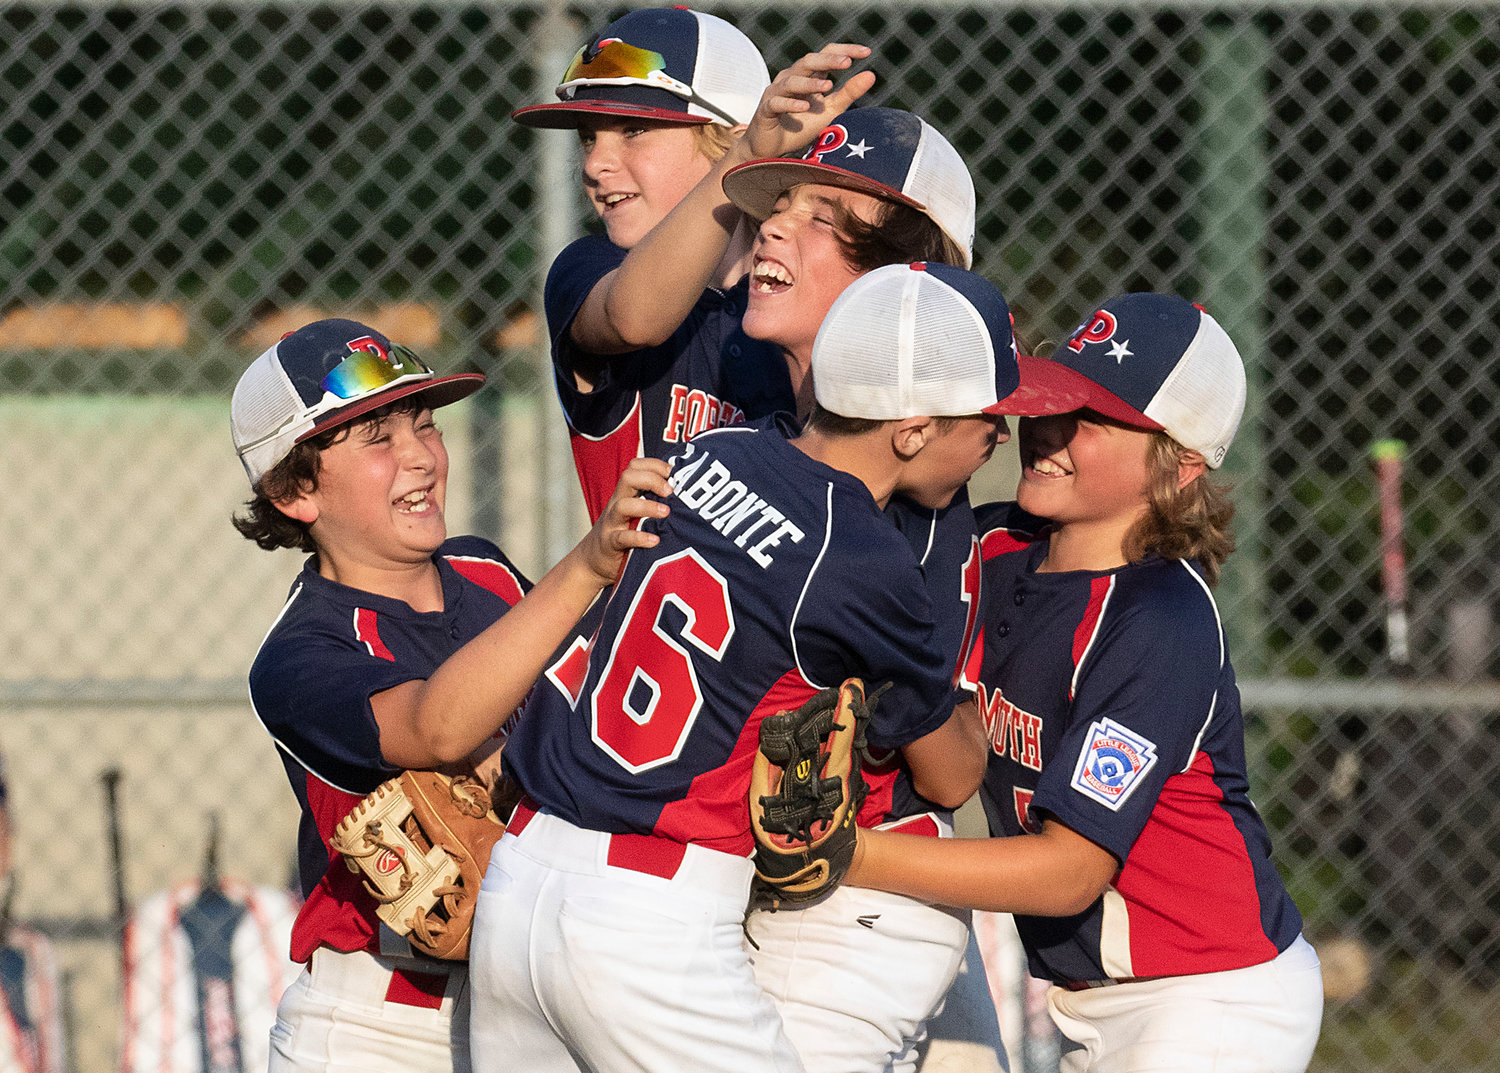 Portsmouth players, Carter Doran (left), Tyler Doucet, Jacob La Bonte and Kane Brule celebrate with pitcher Ben Humm (middle) after they beat Bristol-Warren and secure a spot in the District 2 championship at Sherman field on Saturday.